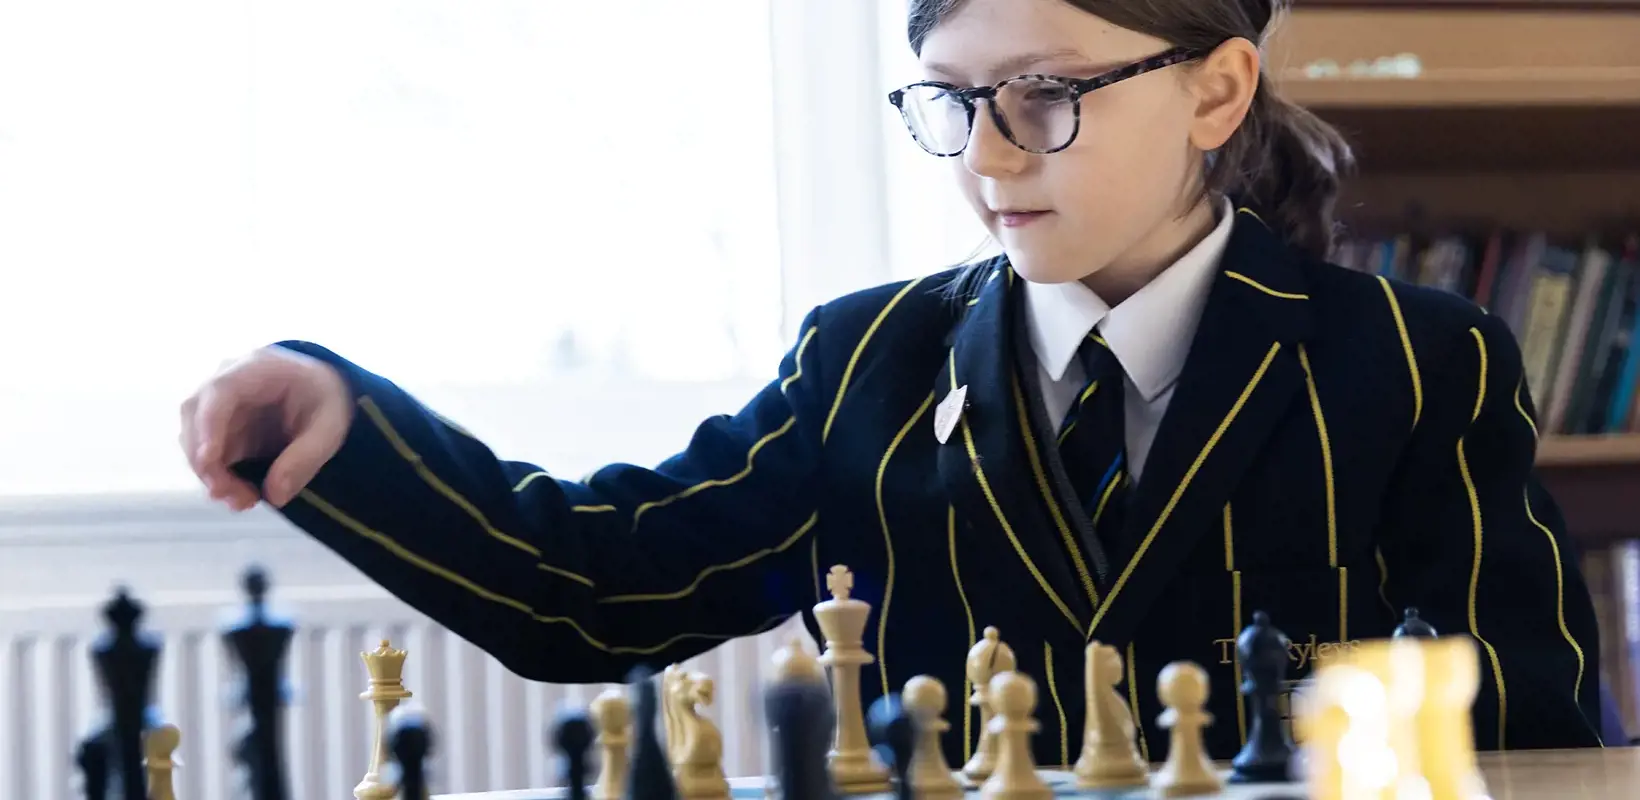 Prep School pupil playing chess at The Ryleys School, a private school in Cheshire